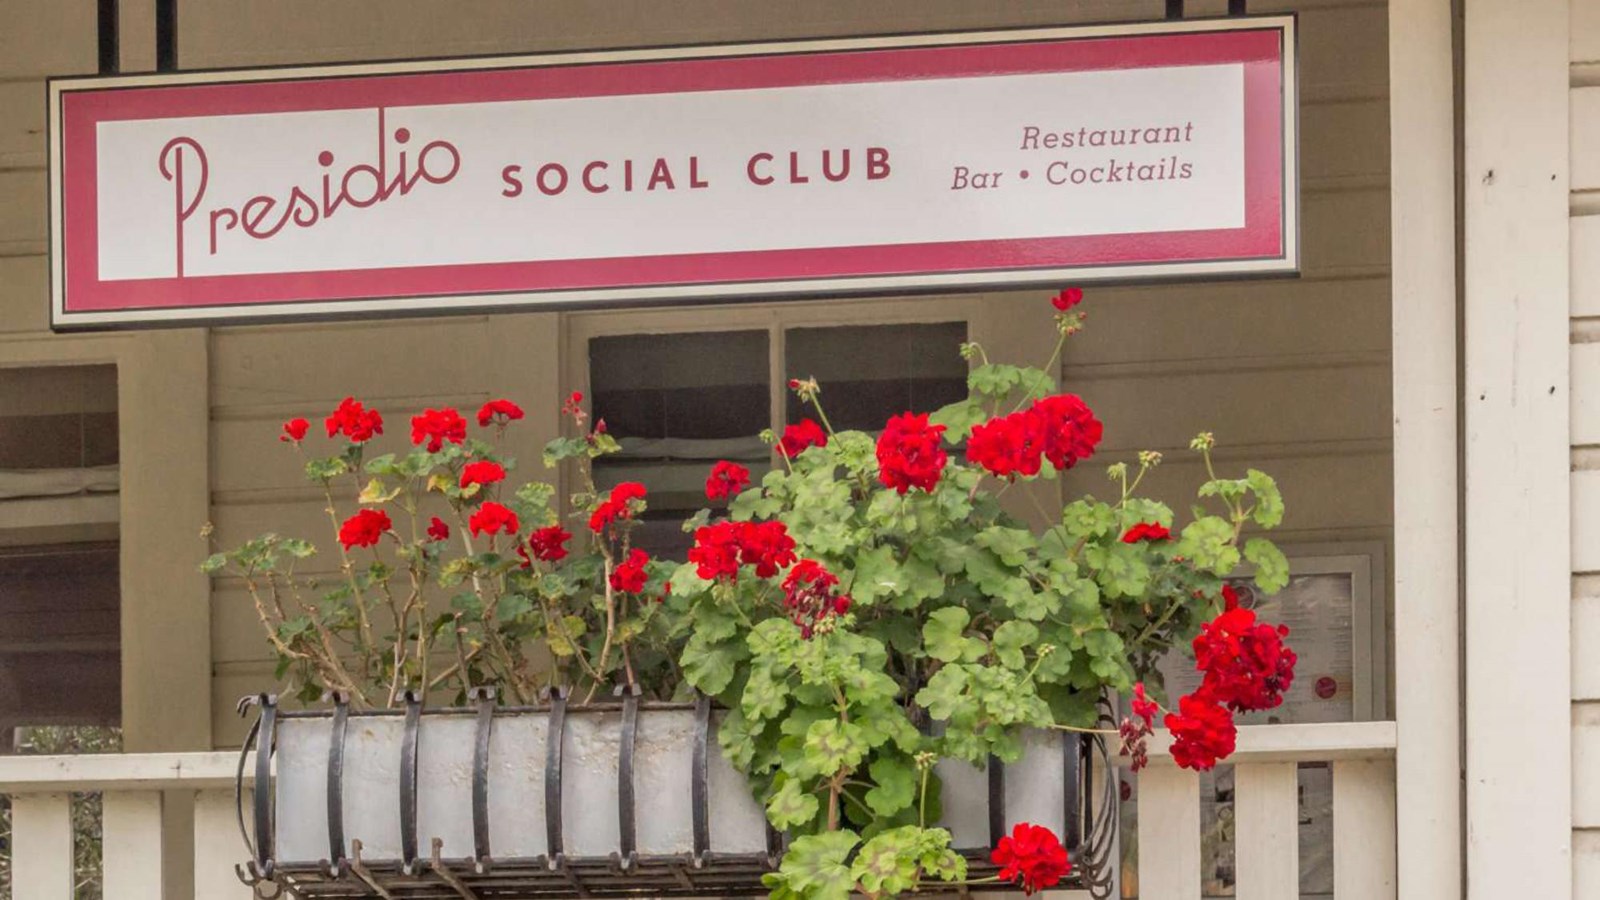 Presidio Social Club sign and bright red geraniums on front porch.